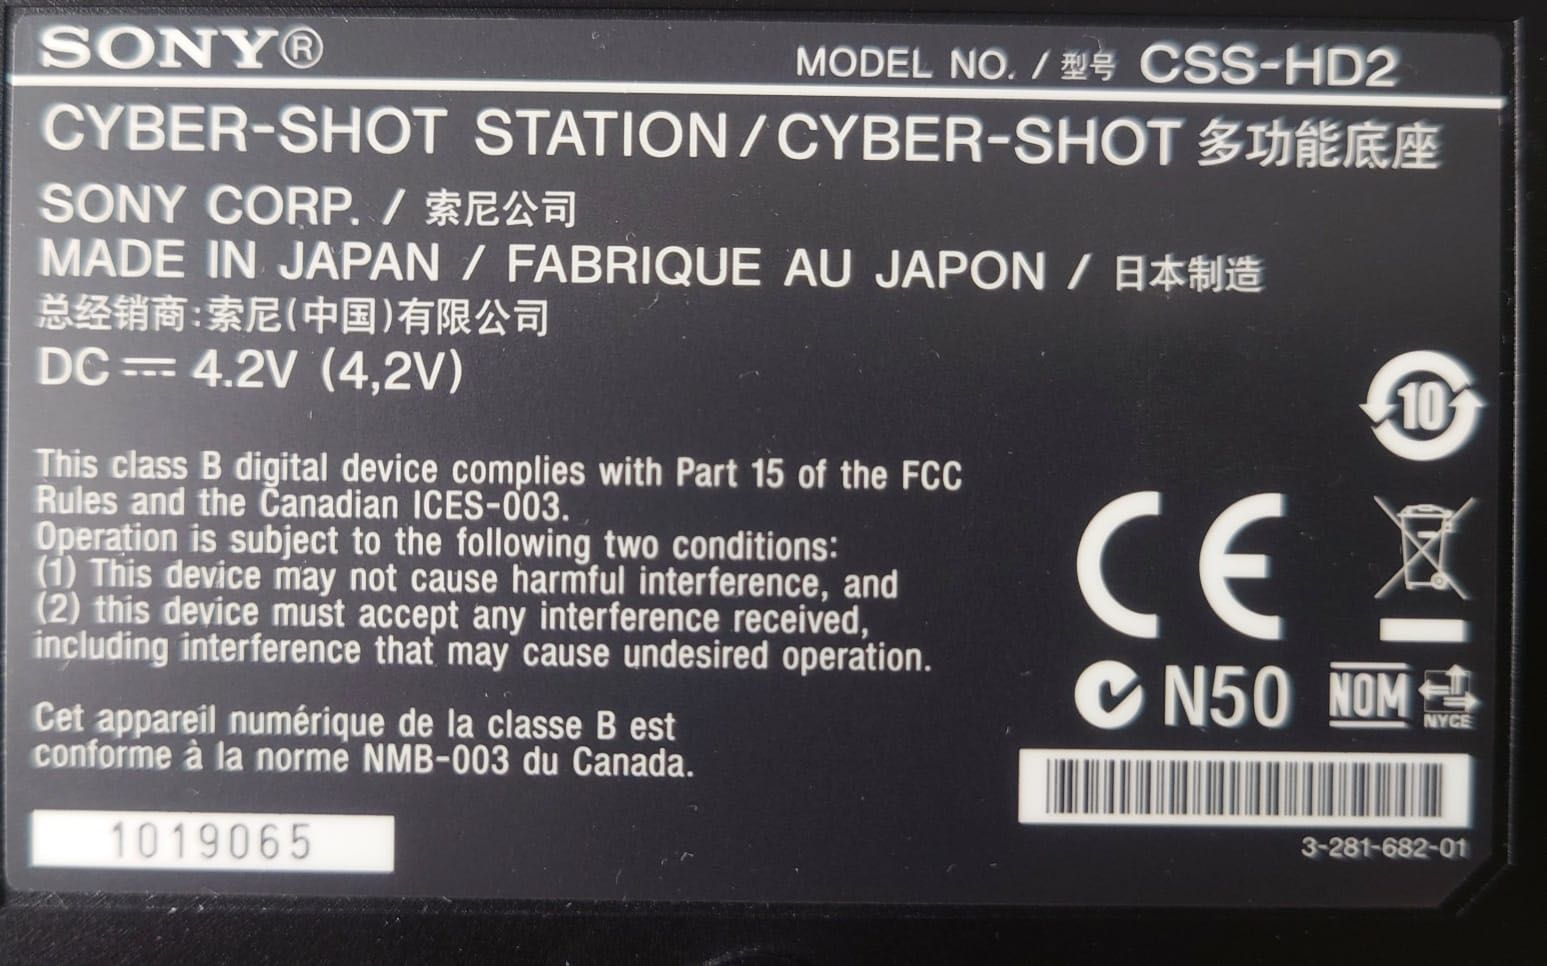 Sony Cyber-shot station CSS-HD